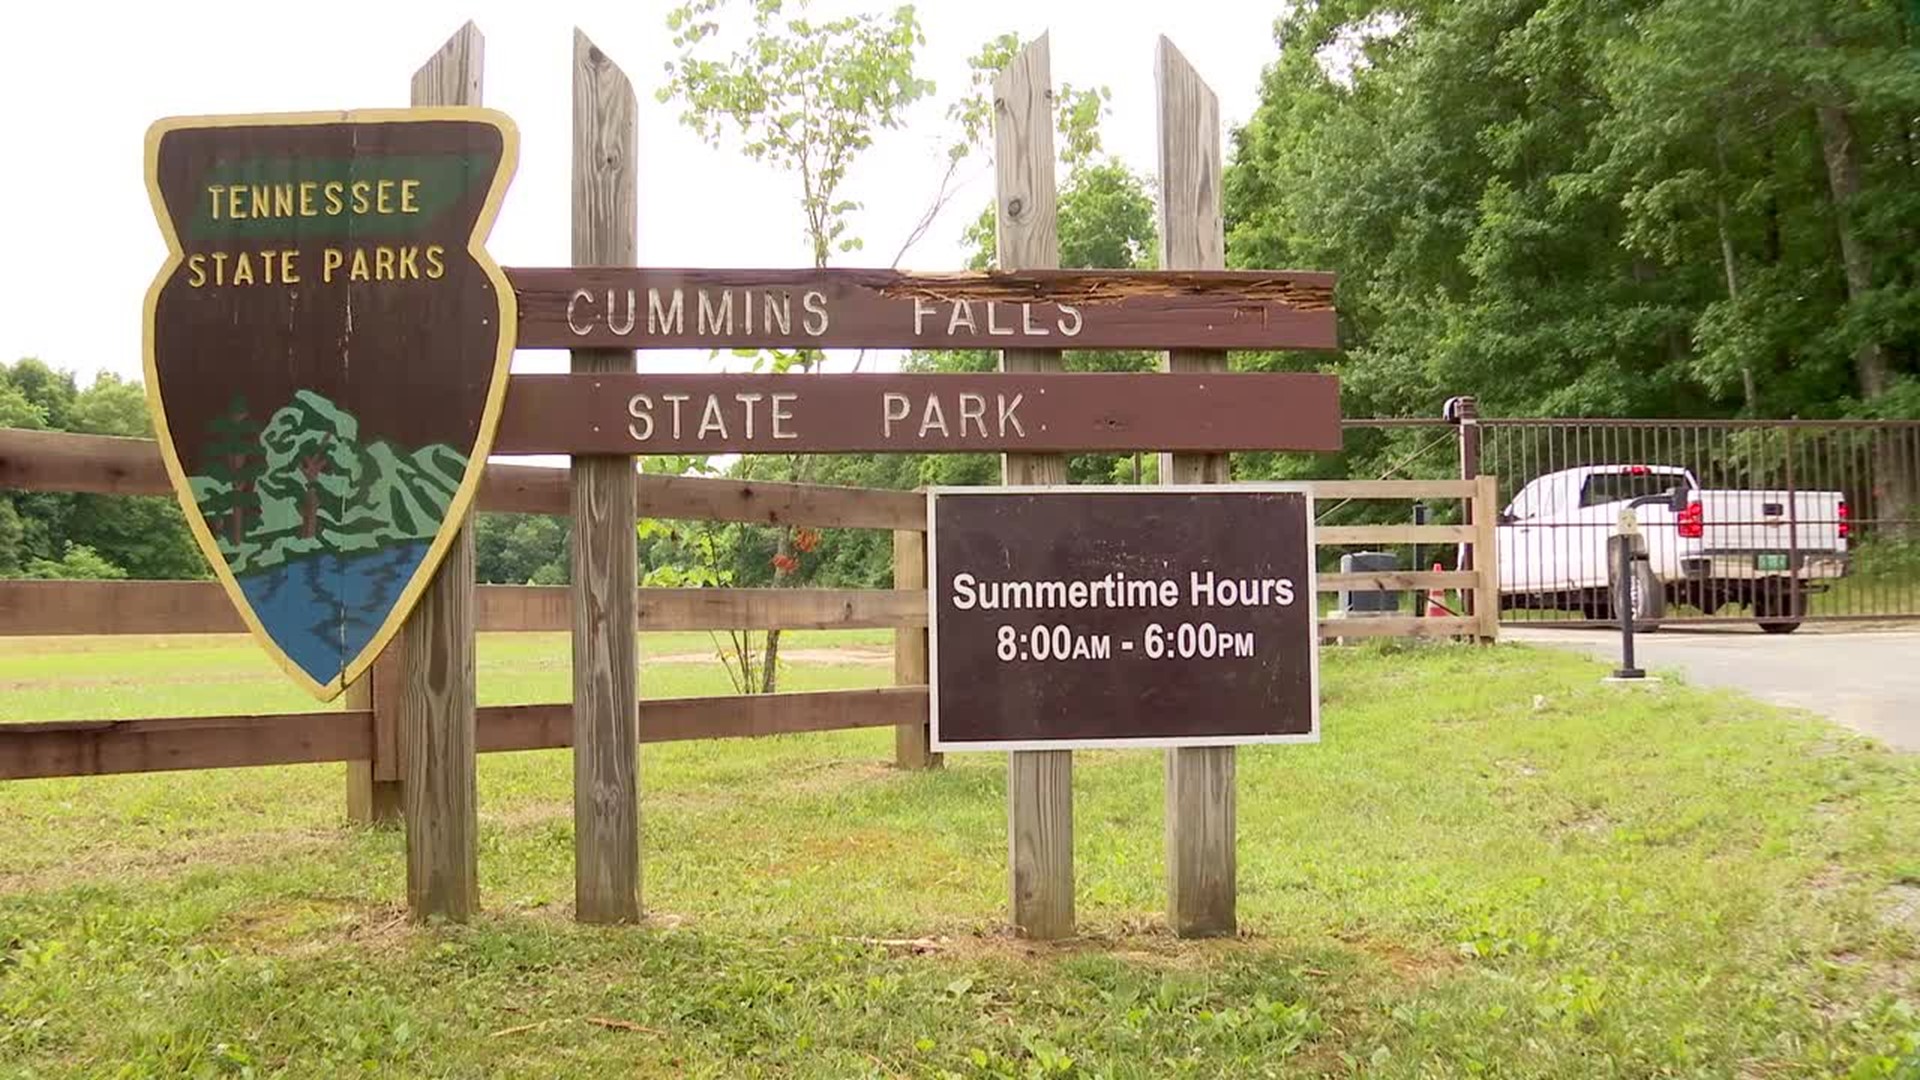 Cummins Falls State Park remains closed after toddler death